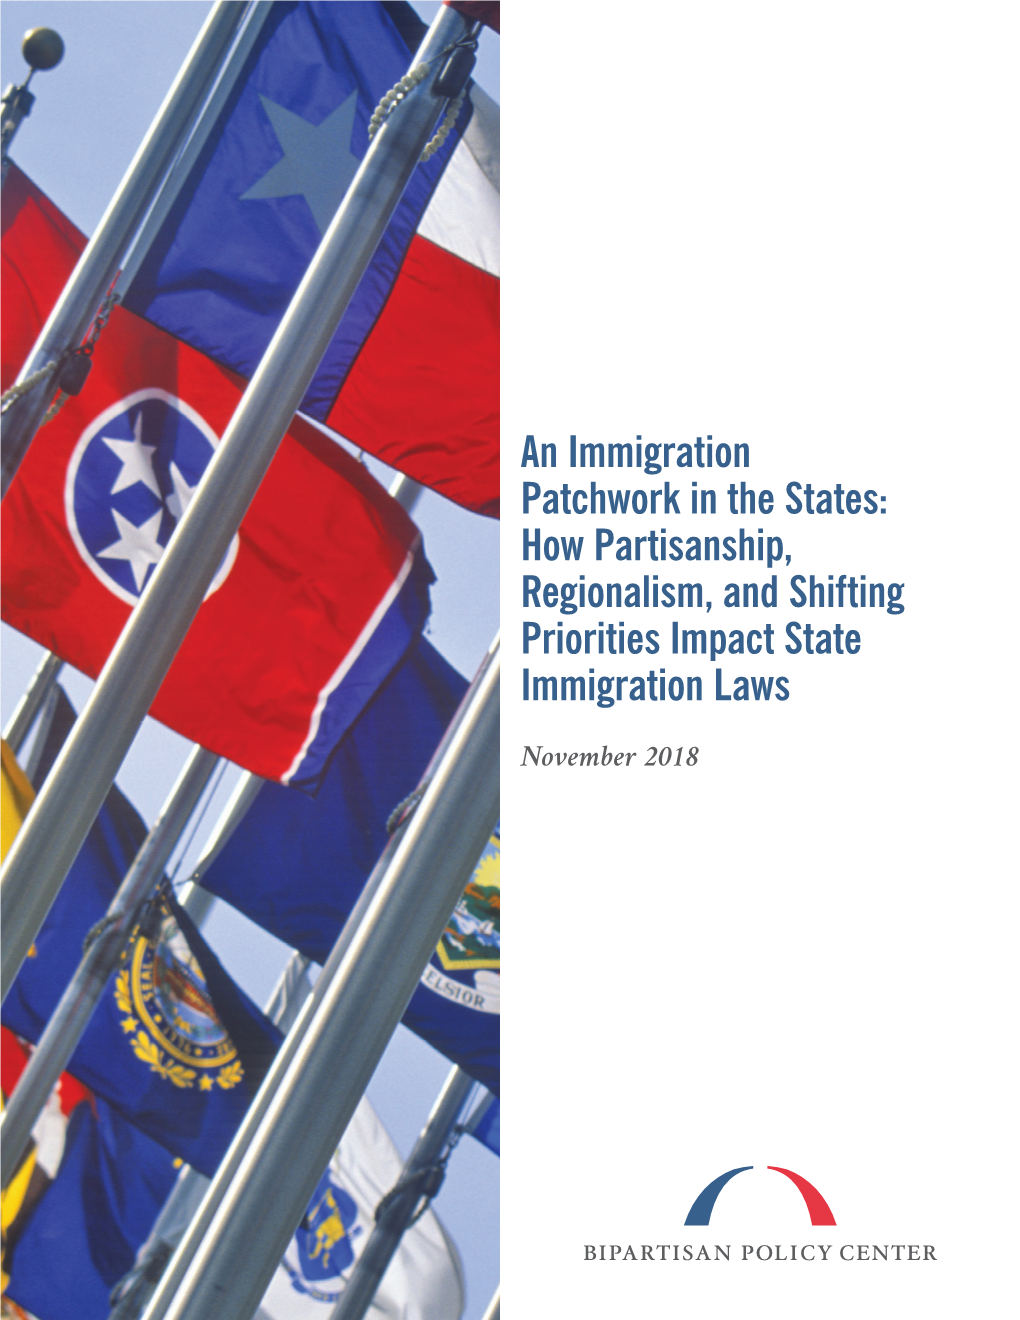 An Immigration Patchwork in the States: How Partisanship, Regionalism, and Shifting Priorities Impact State Immigration Laws